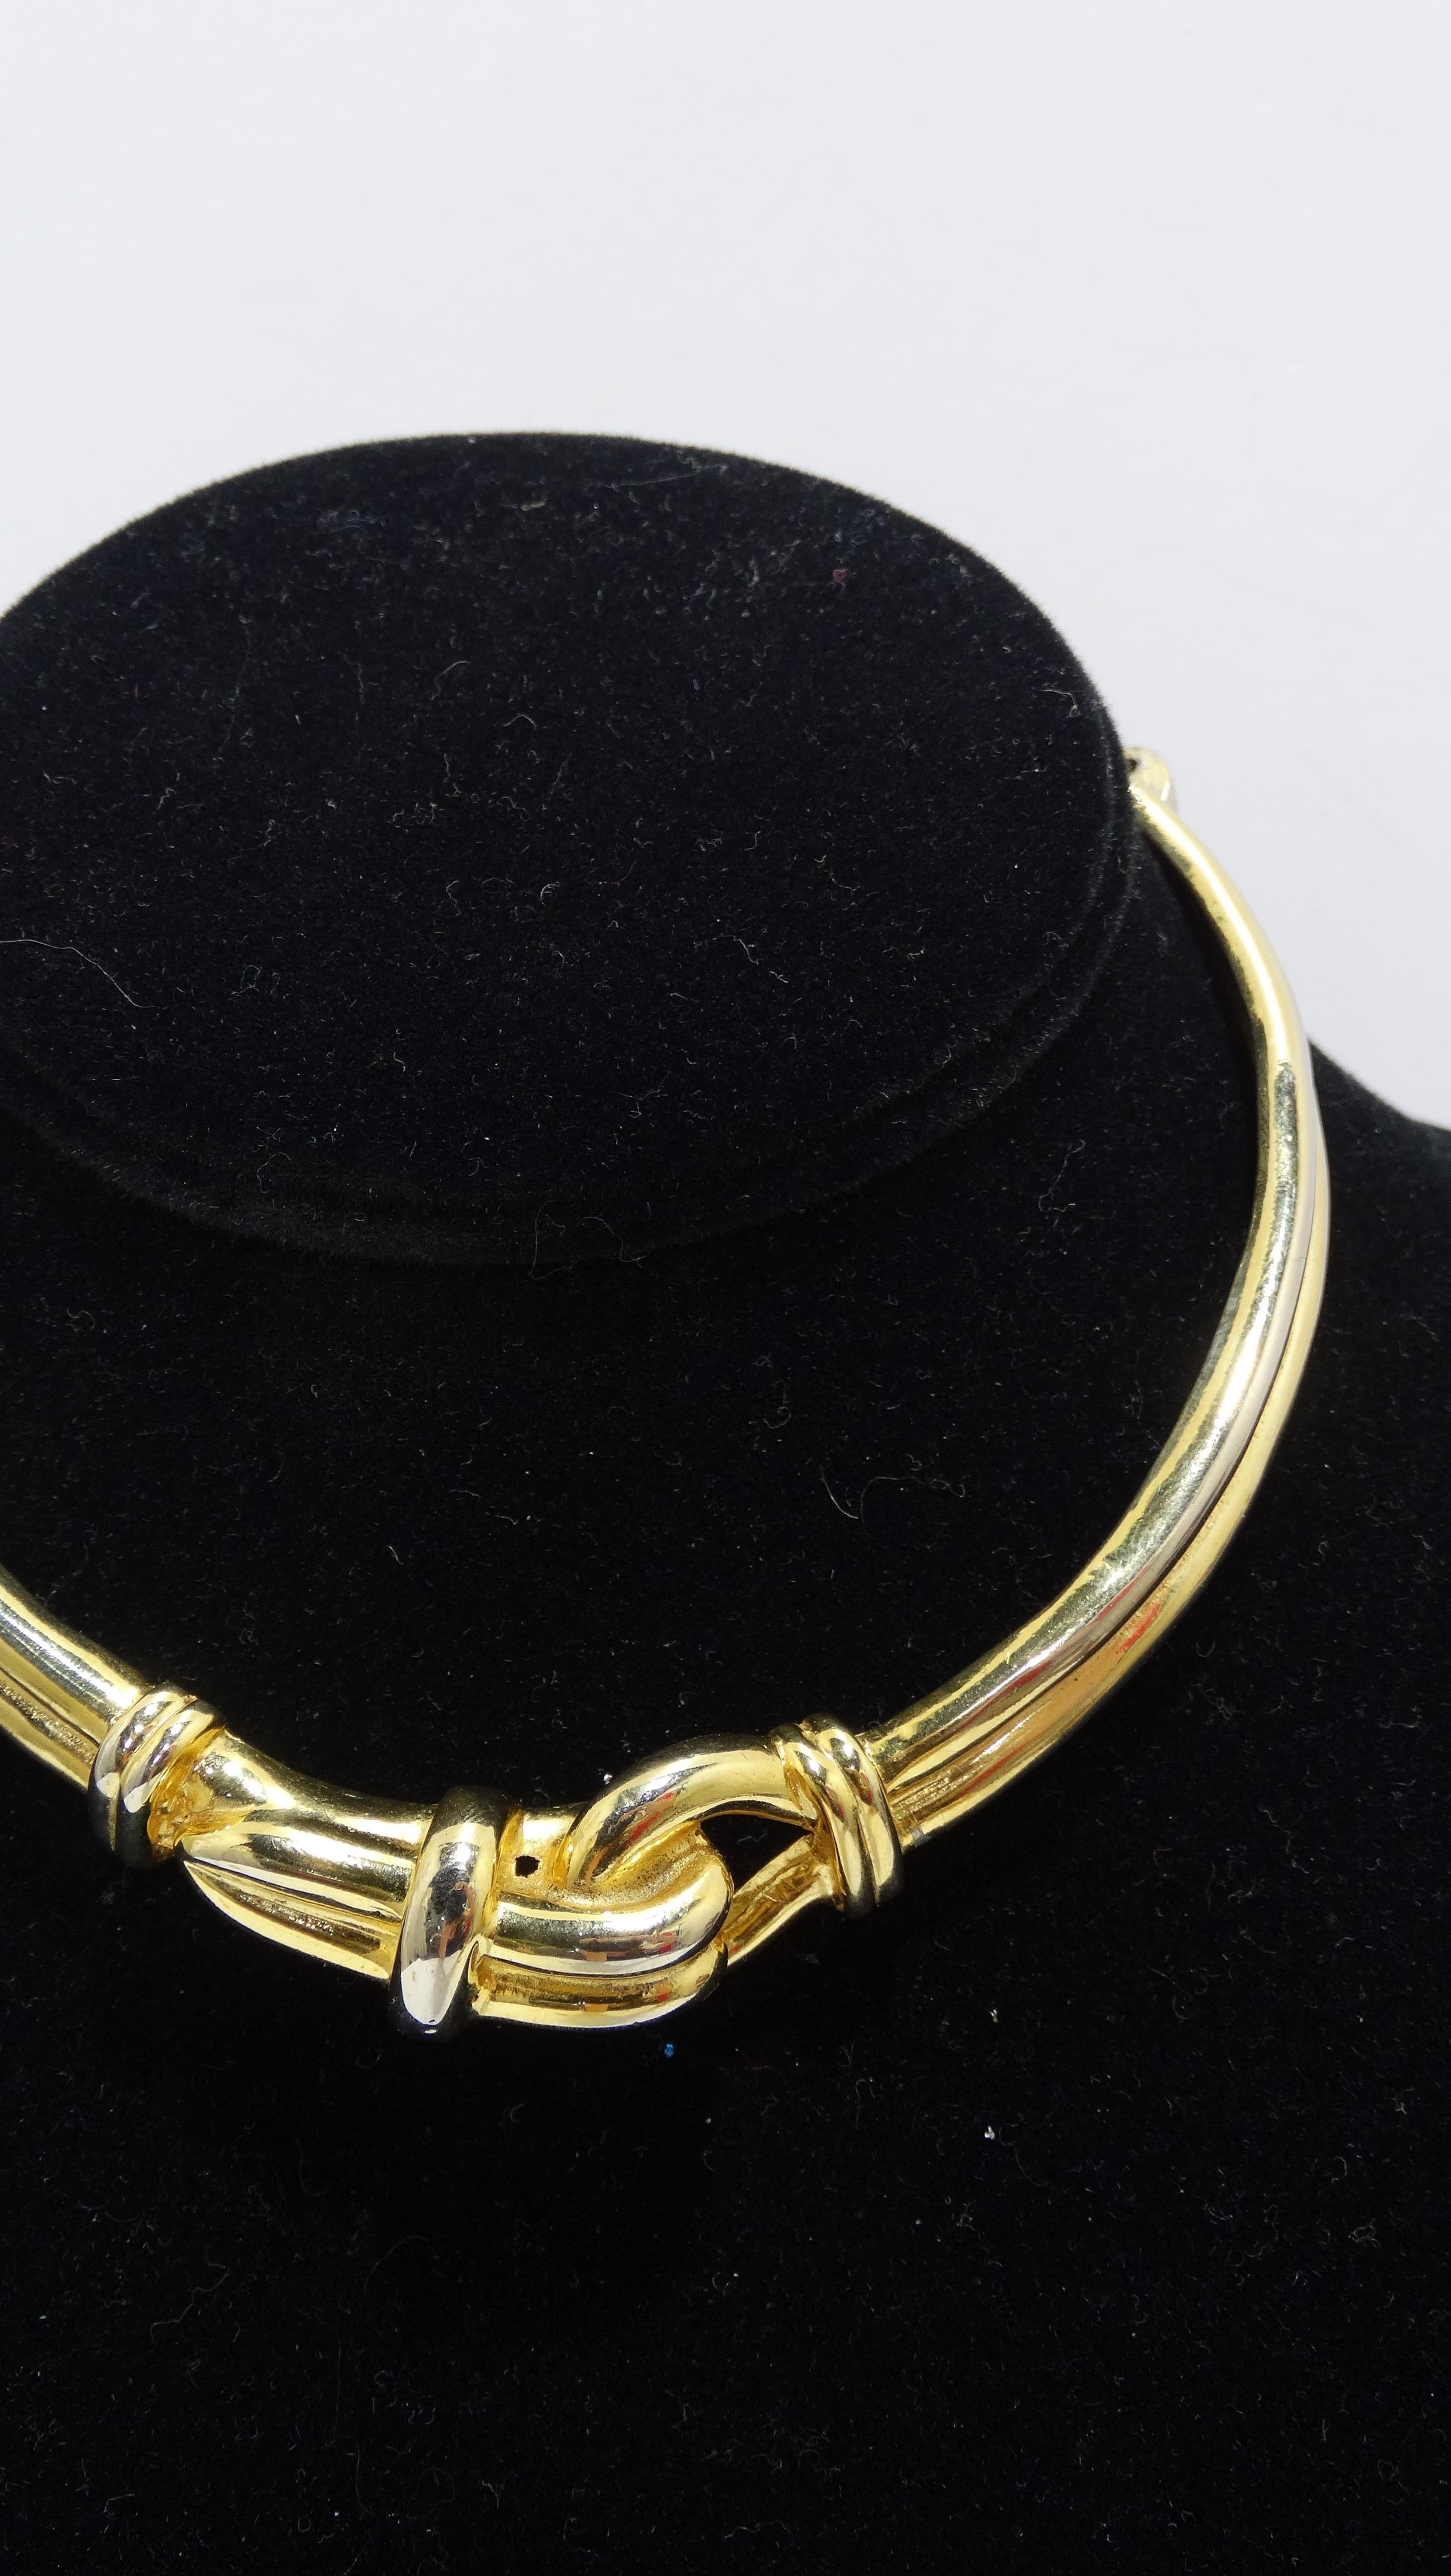 You will feel nothing short of bold and beautiful in this 1980's Donald Stannard necklace! Do not overlook the crafted details. Notice the knot-details that detail the piece, the hook-closure, and the choker length. Signed Donald Stannard as